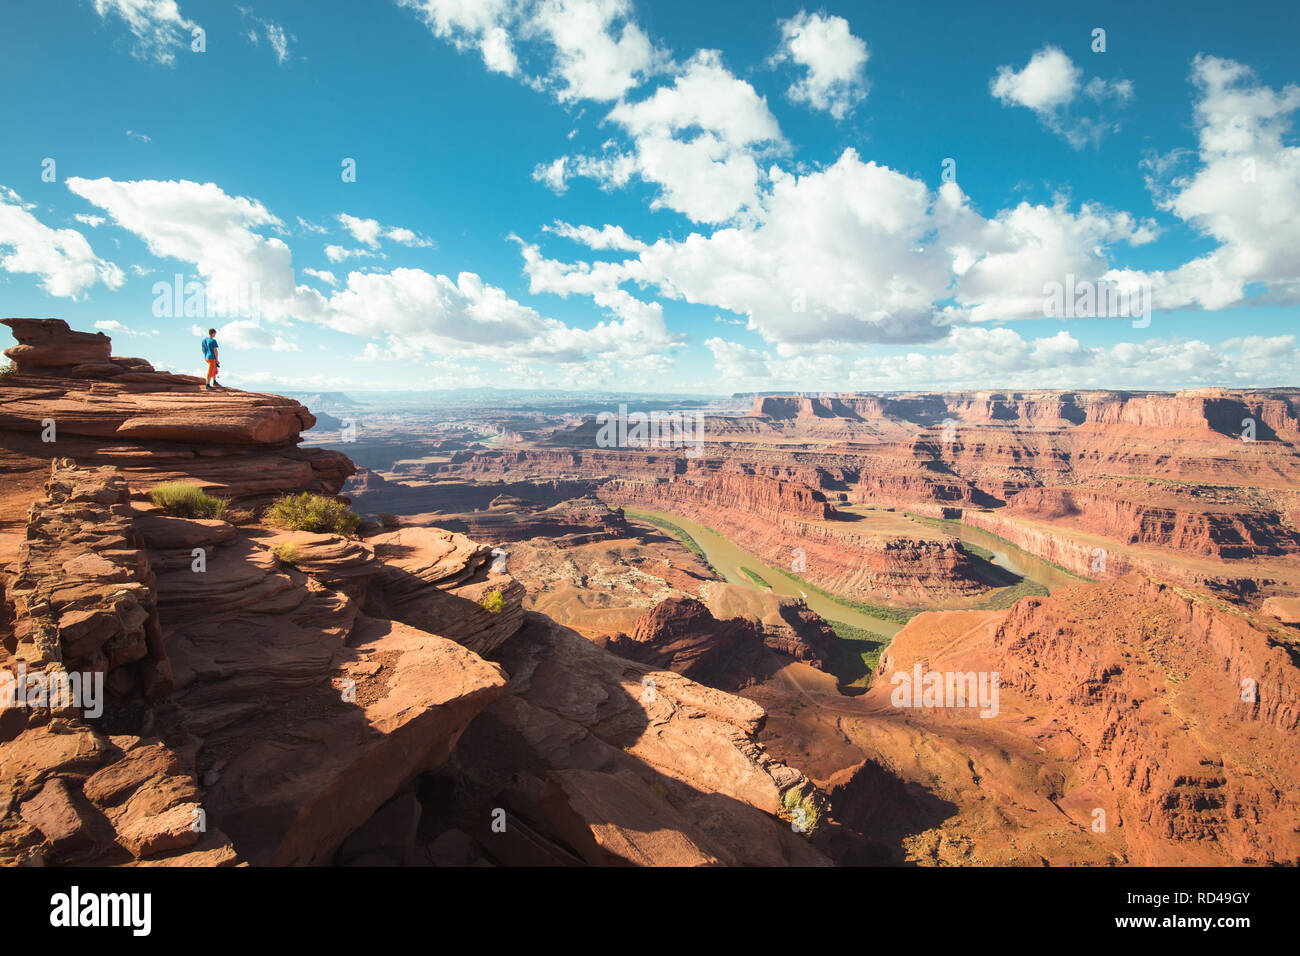 A young male hiker is standing on the edge of a cliff enjoying a dramatic overlook of the famous Colorado River, Dead Horse Point State Park. Utah, US Stock Photo